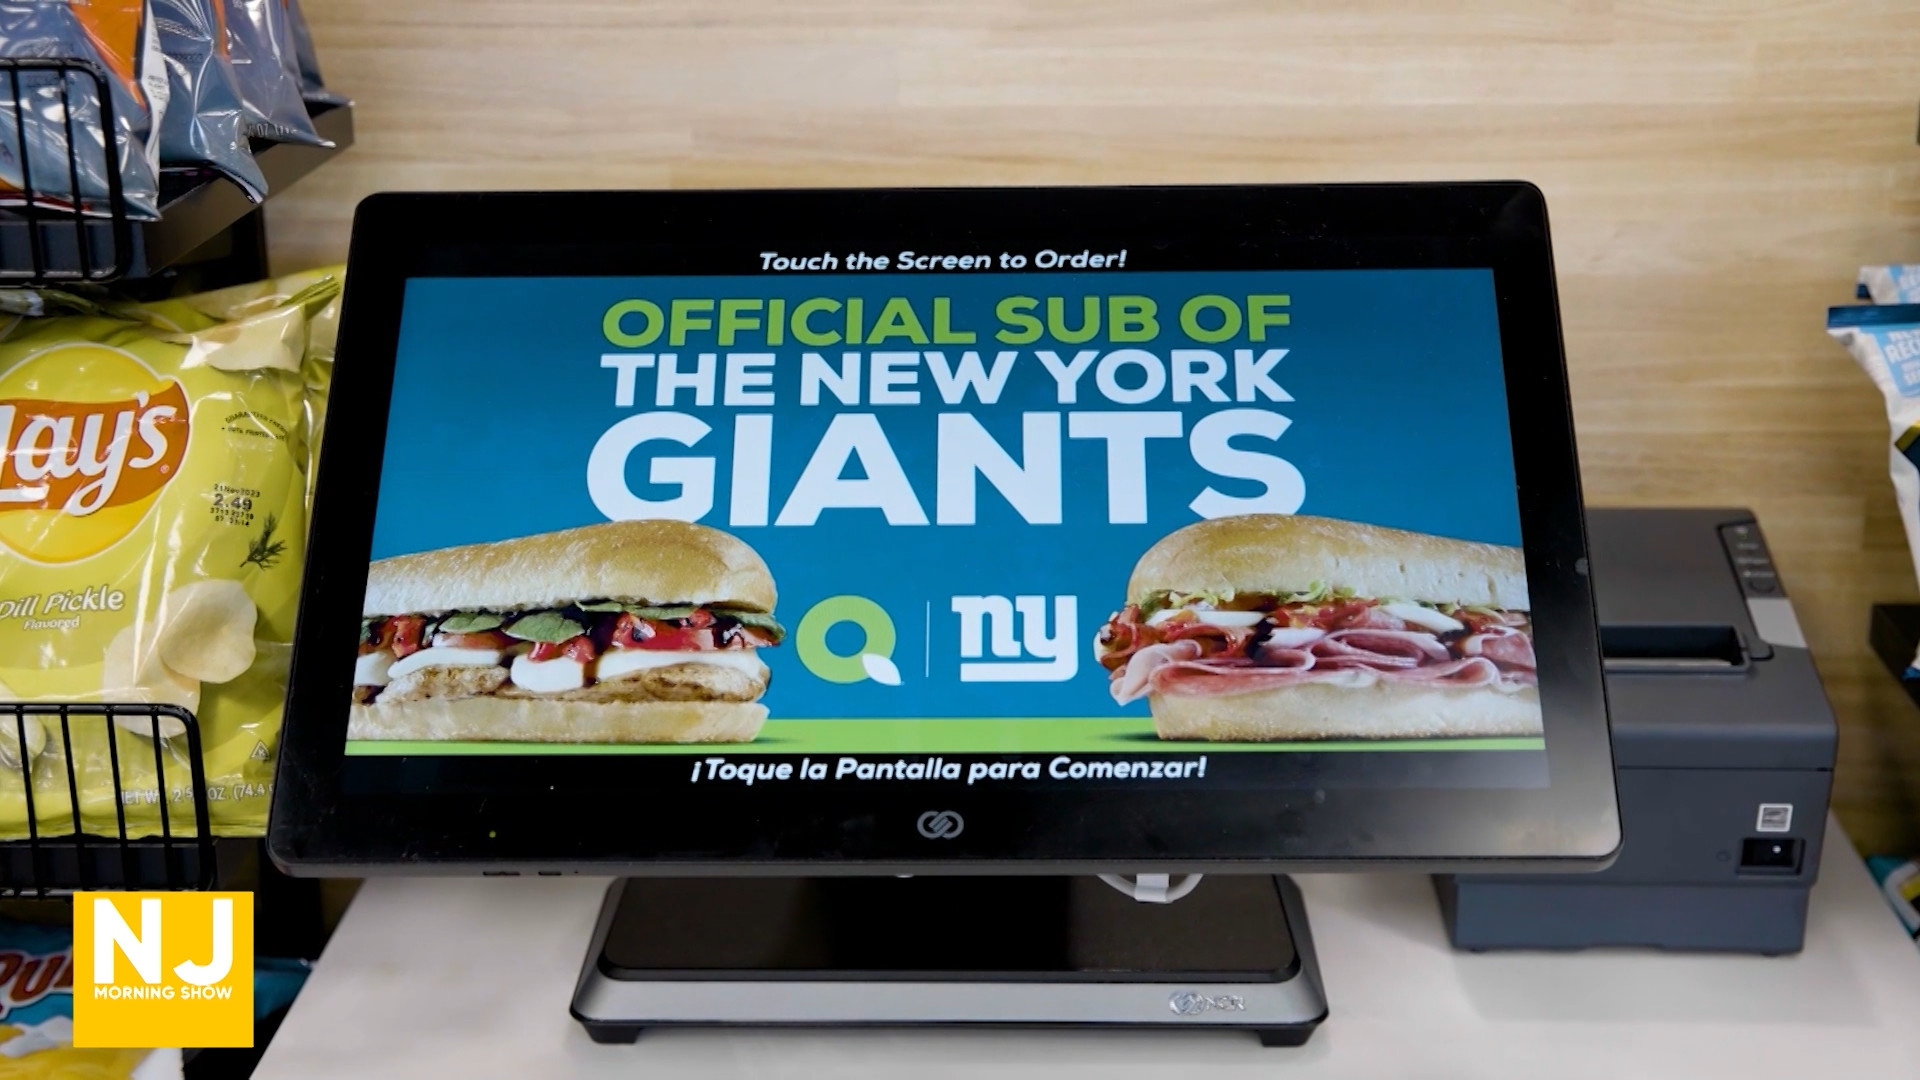 QuickChek is the Official Sub Sandwich of the NY Giants